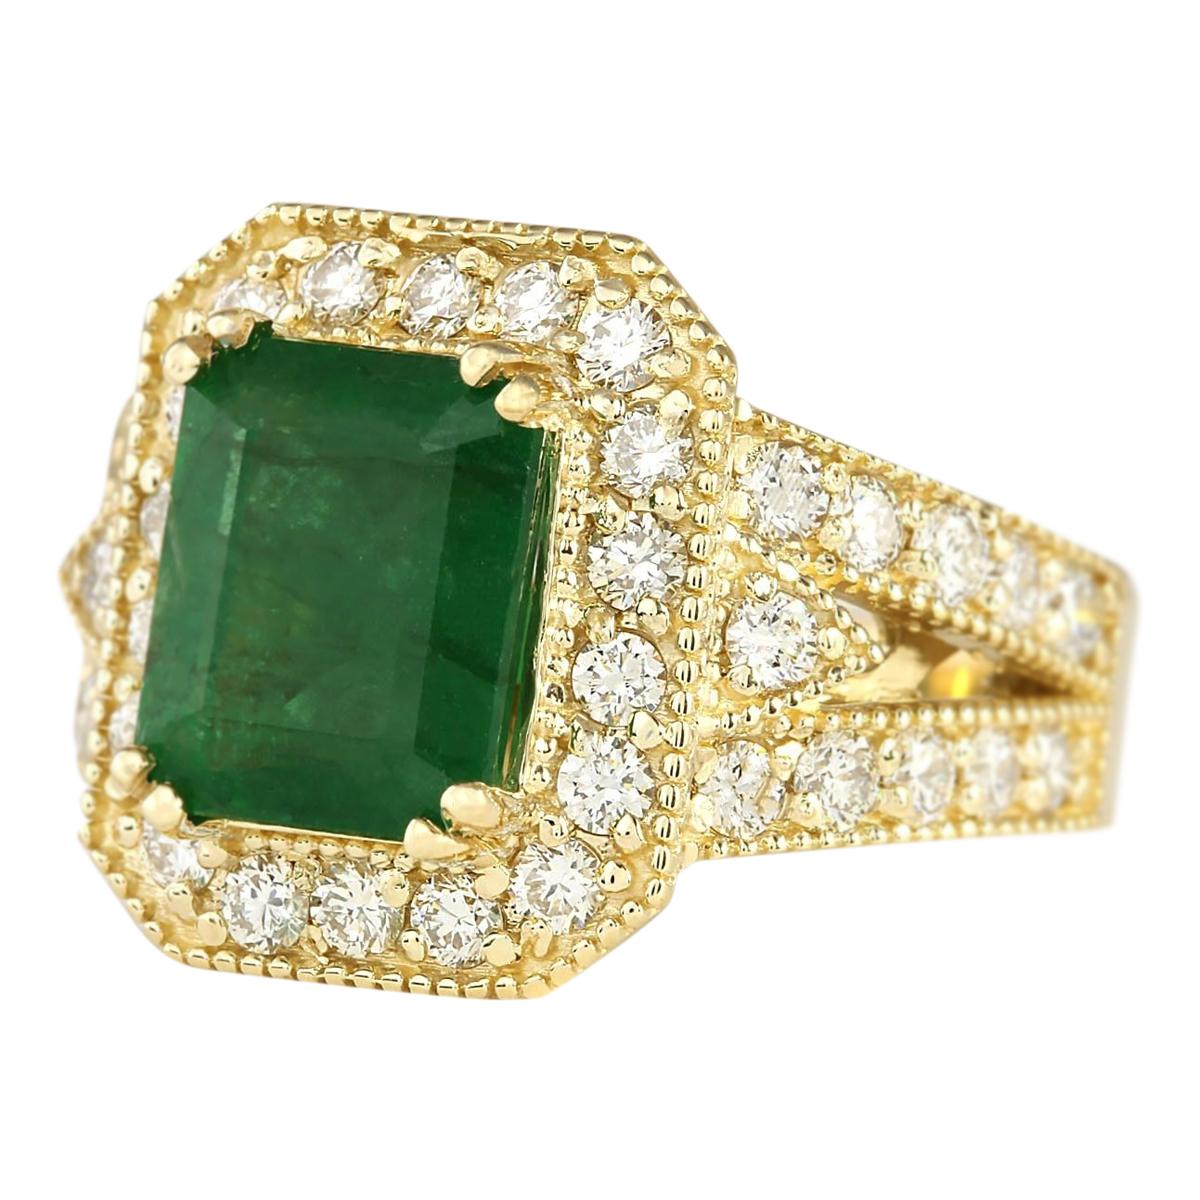 Stamped: 14K Yellow Gold
Total Ring Weight: 9.8 Grams
Emerald Weight is 3.58 Carat (Measures: 10.00x8.00 mm)
Total Natural Diamond Weight is 1.28 Carat
Color: F-G, Clarity: VS2-SI1
Face Measures: 15.80x13.25 mm
Sku: [703918W]